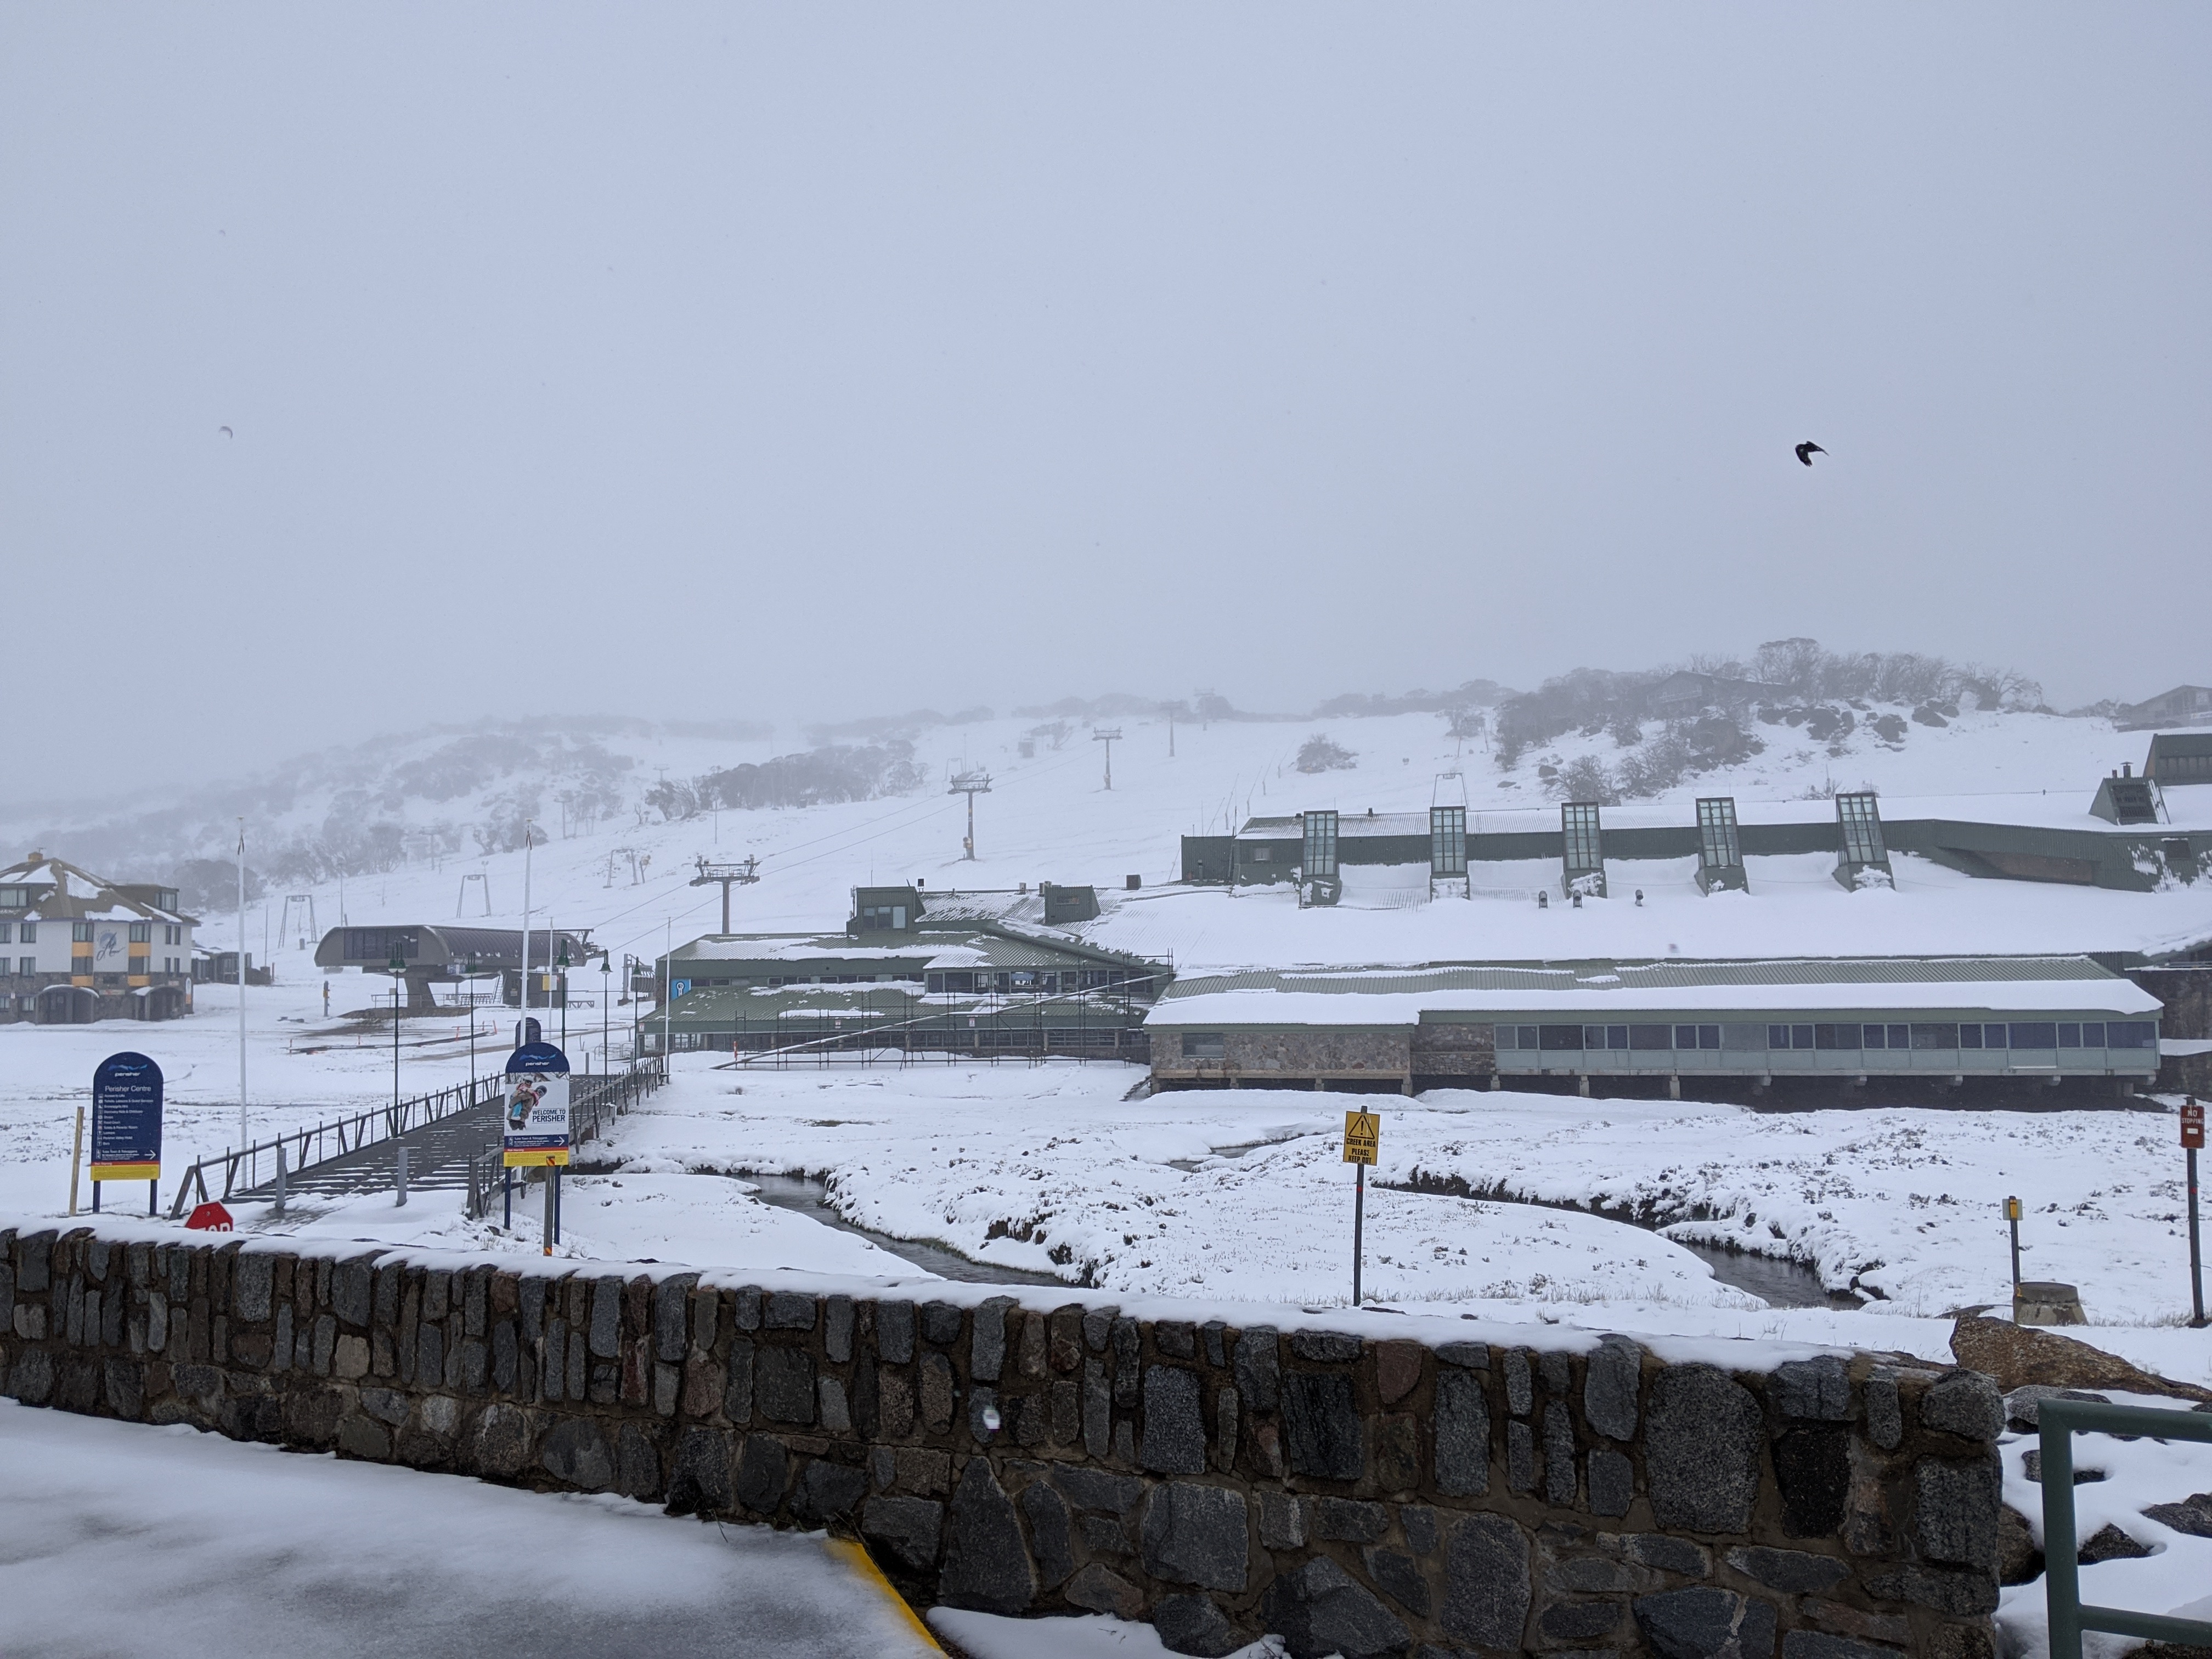 Summer snowfall in Perisher has residents gambling on a white Christmas